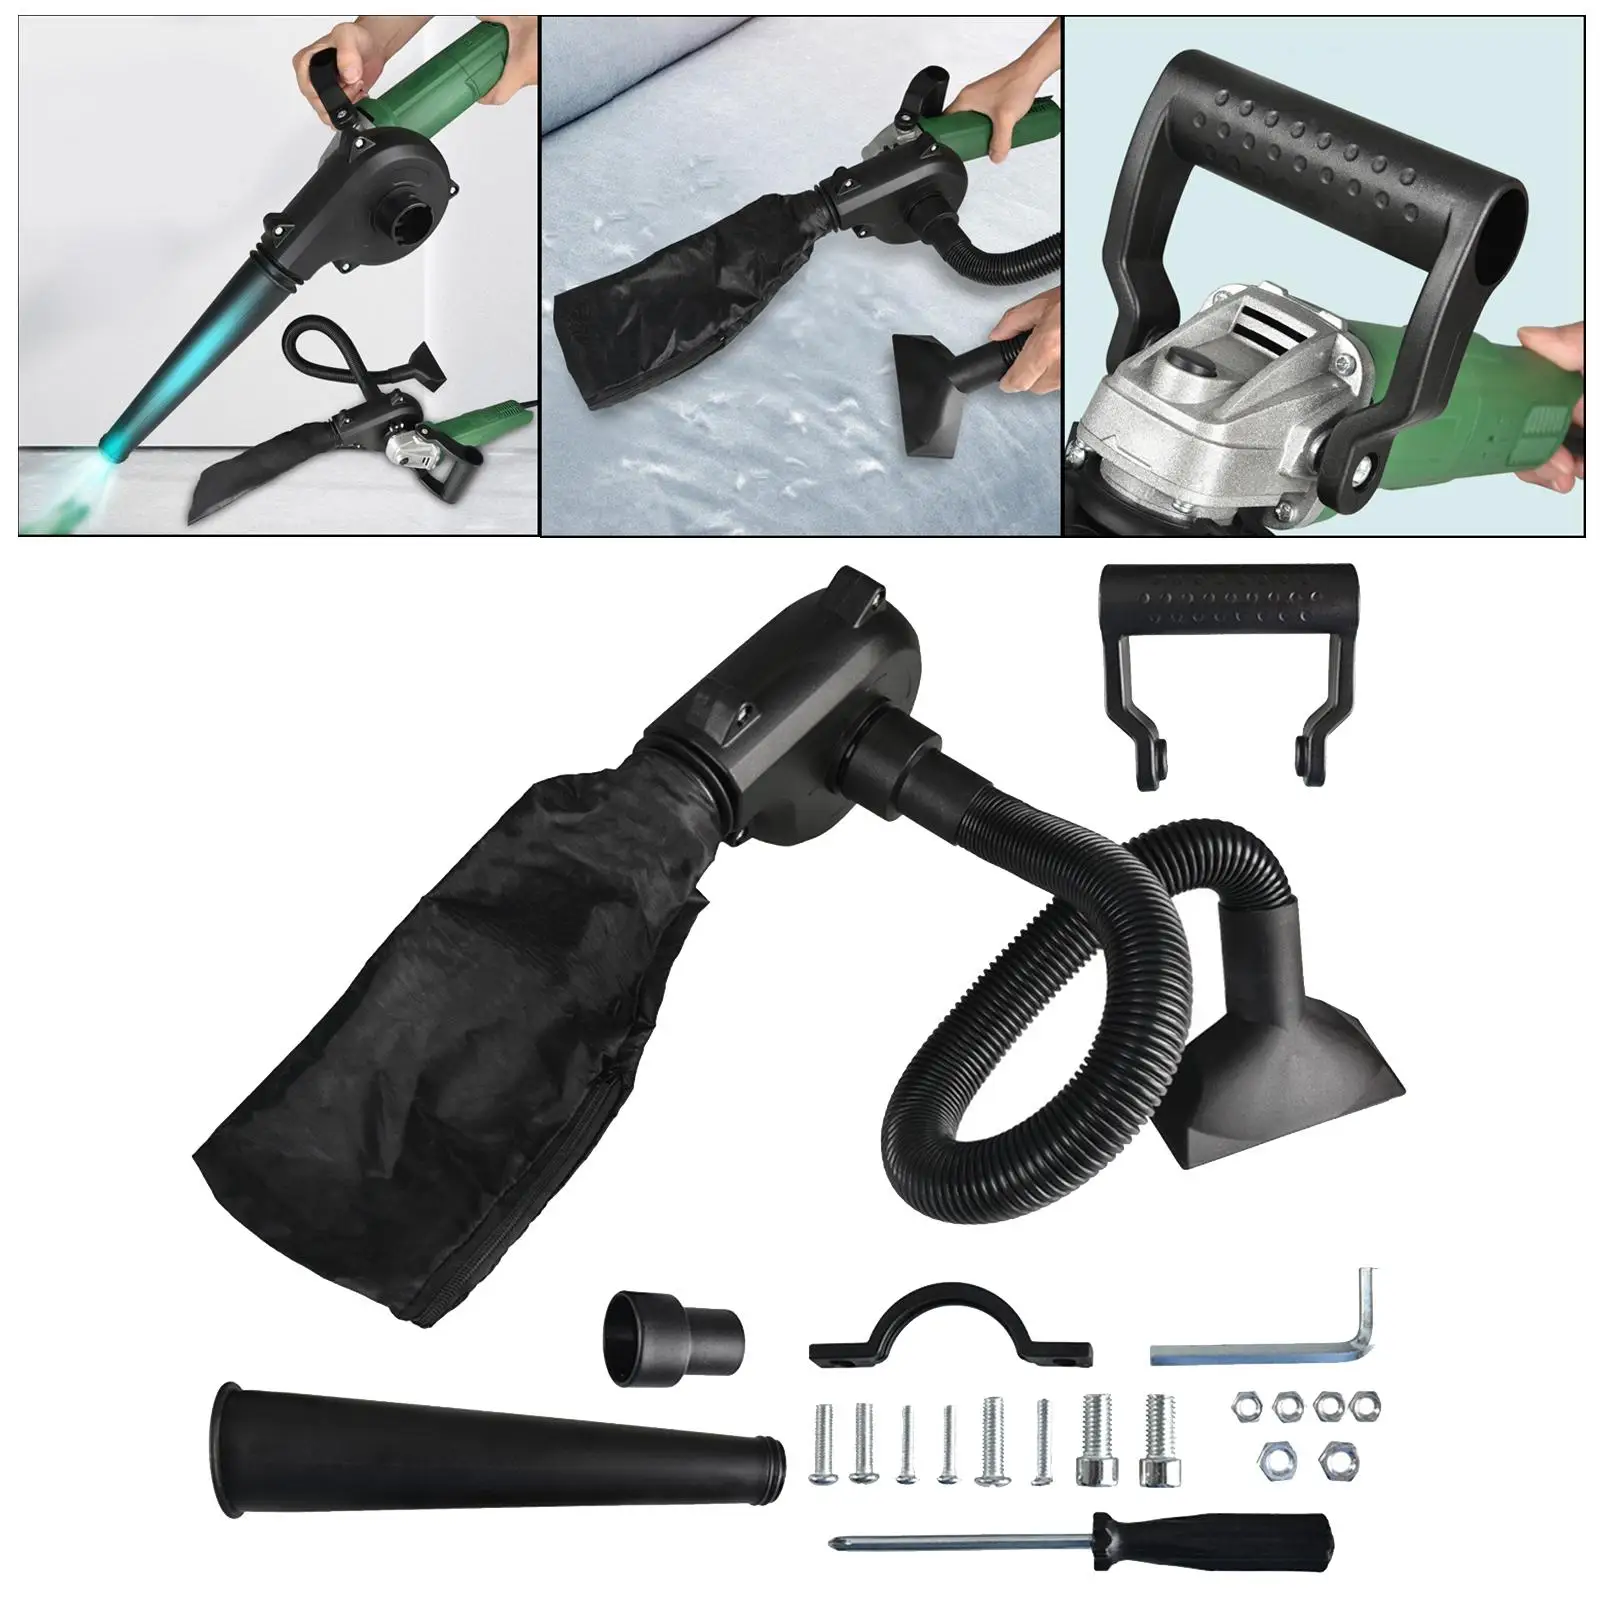 Blower Suction Converter Set Househld for Cleaning Dust, Hairs, Crumbs